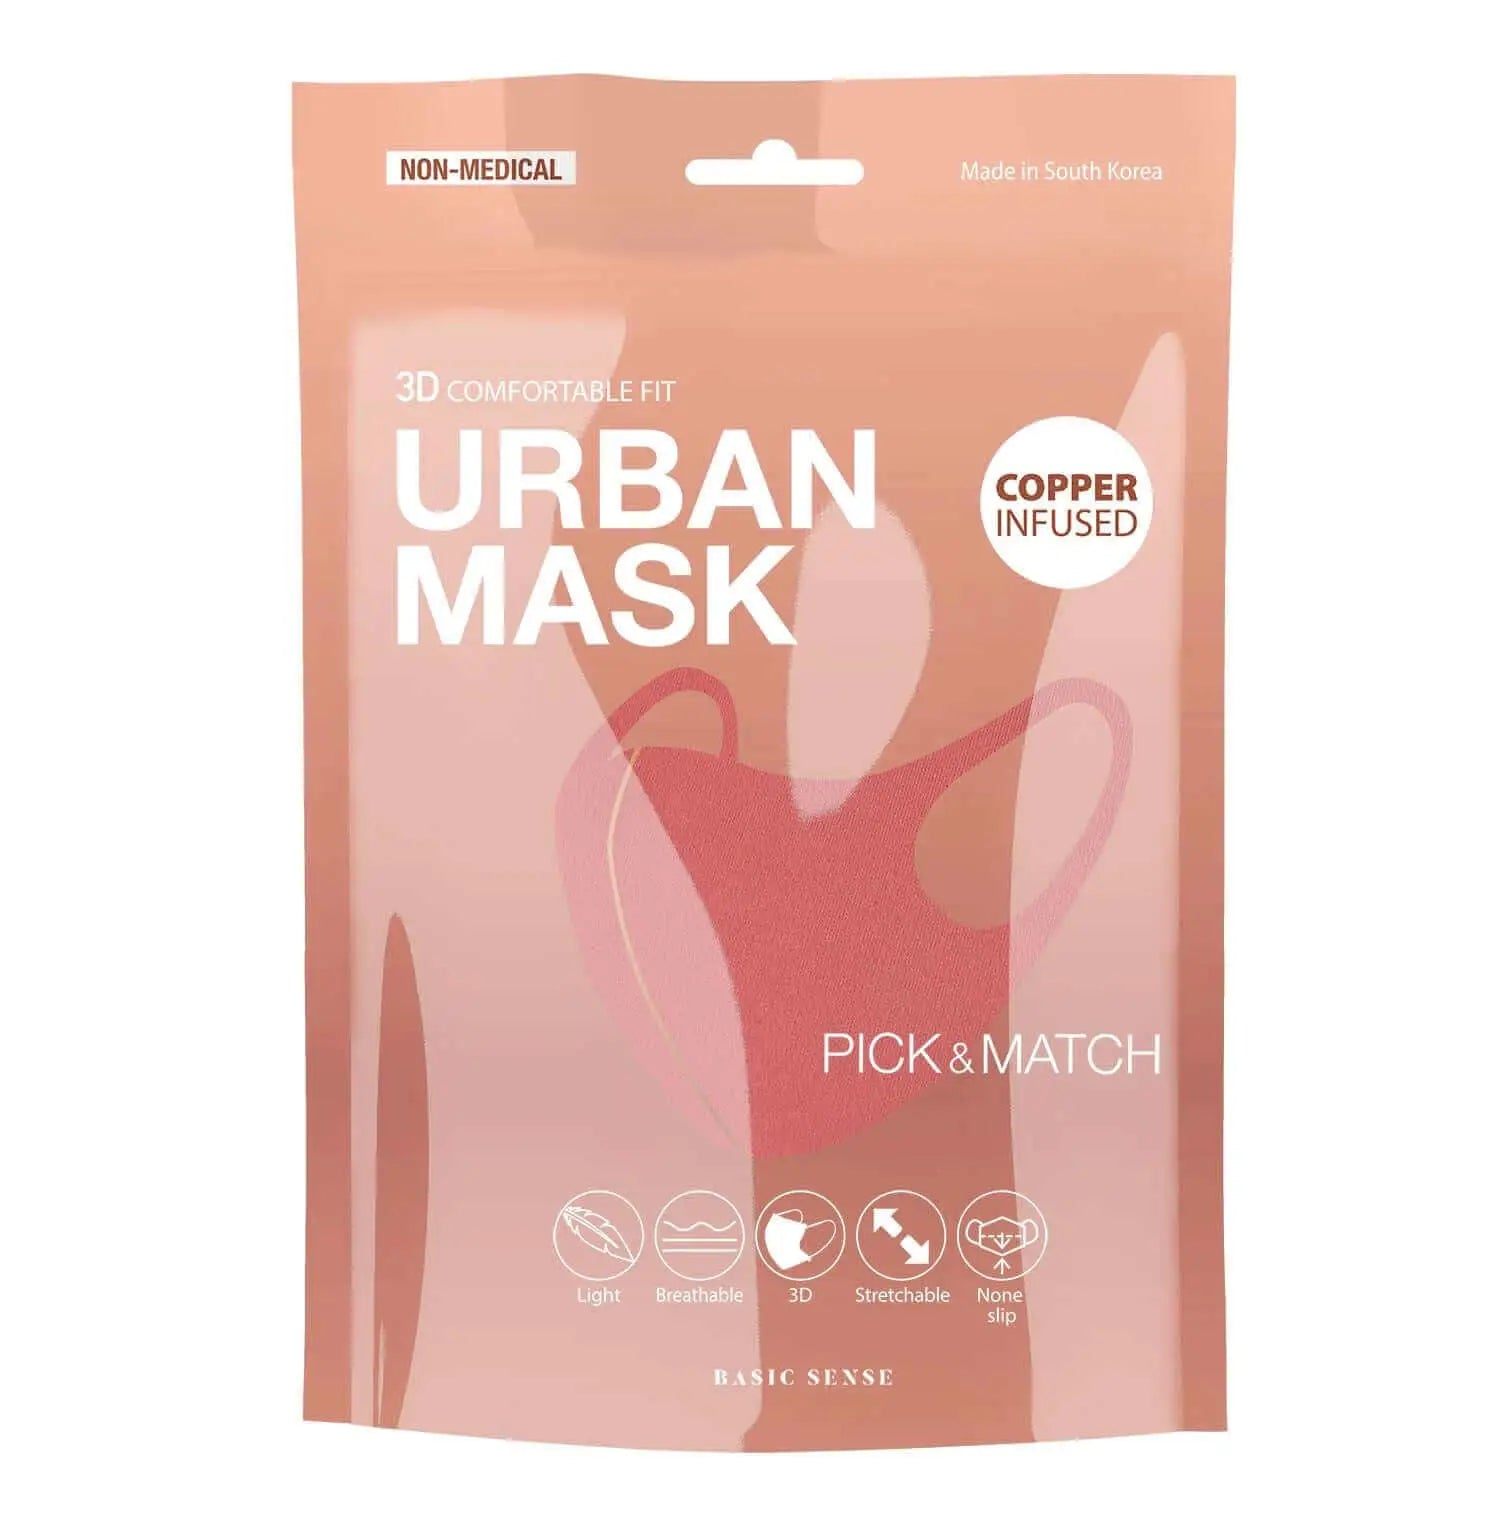 Pink copper-infused face mask with bra design for stylish protection